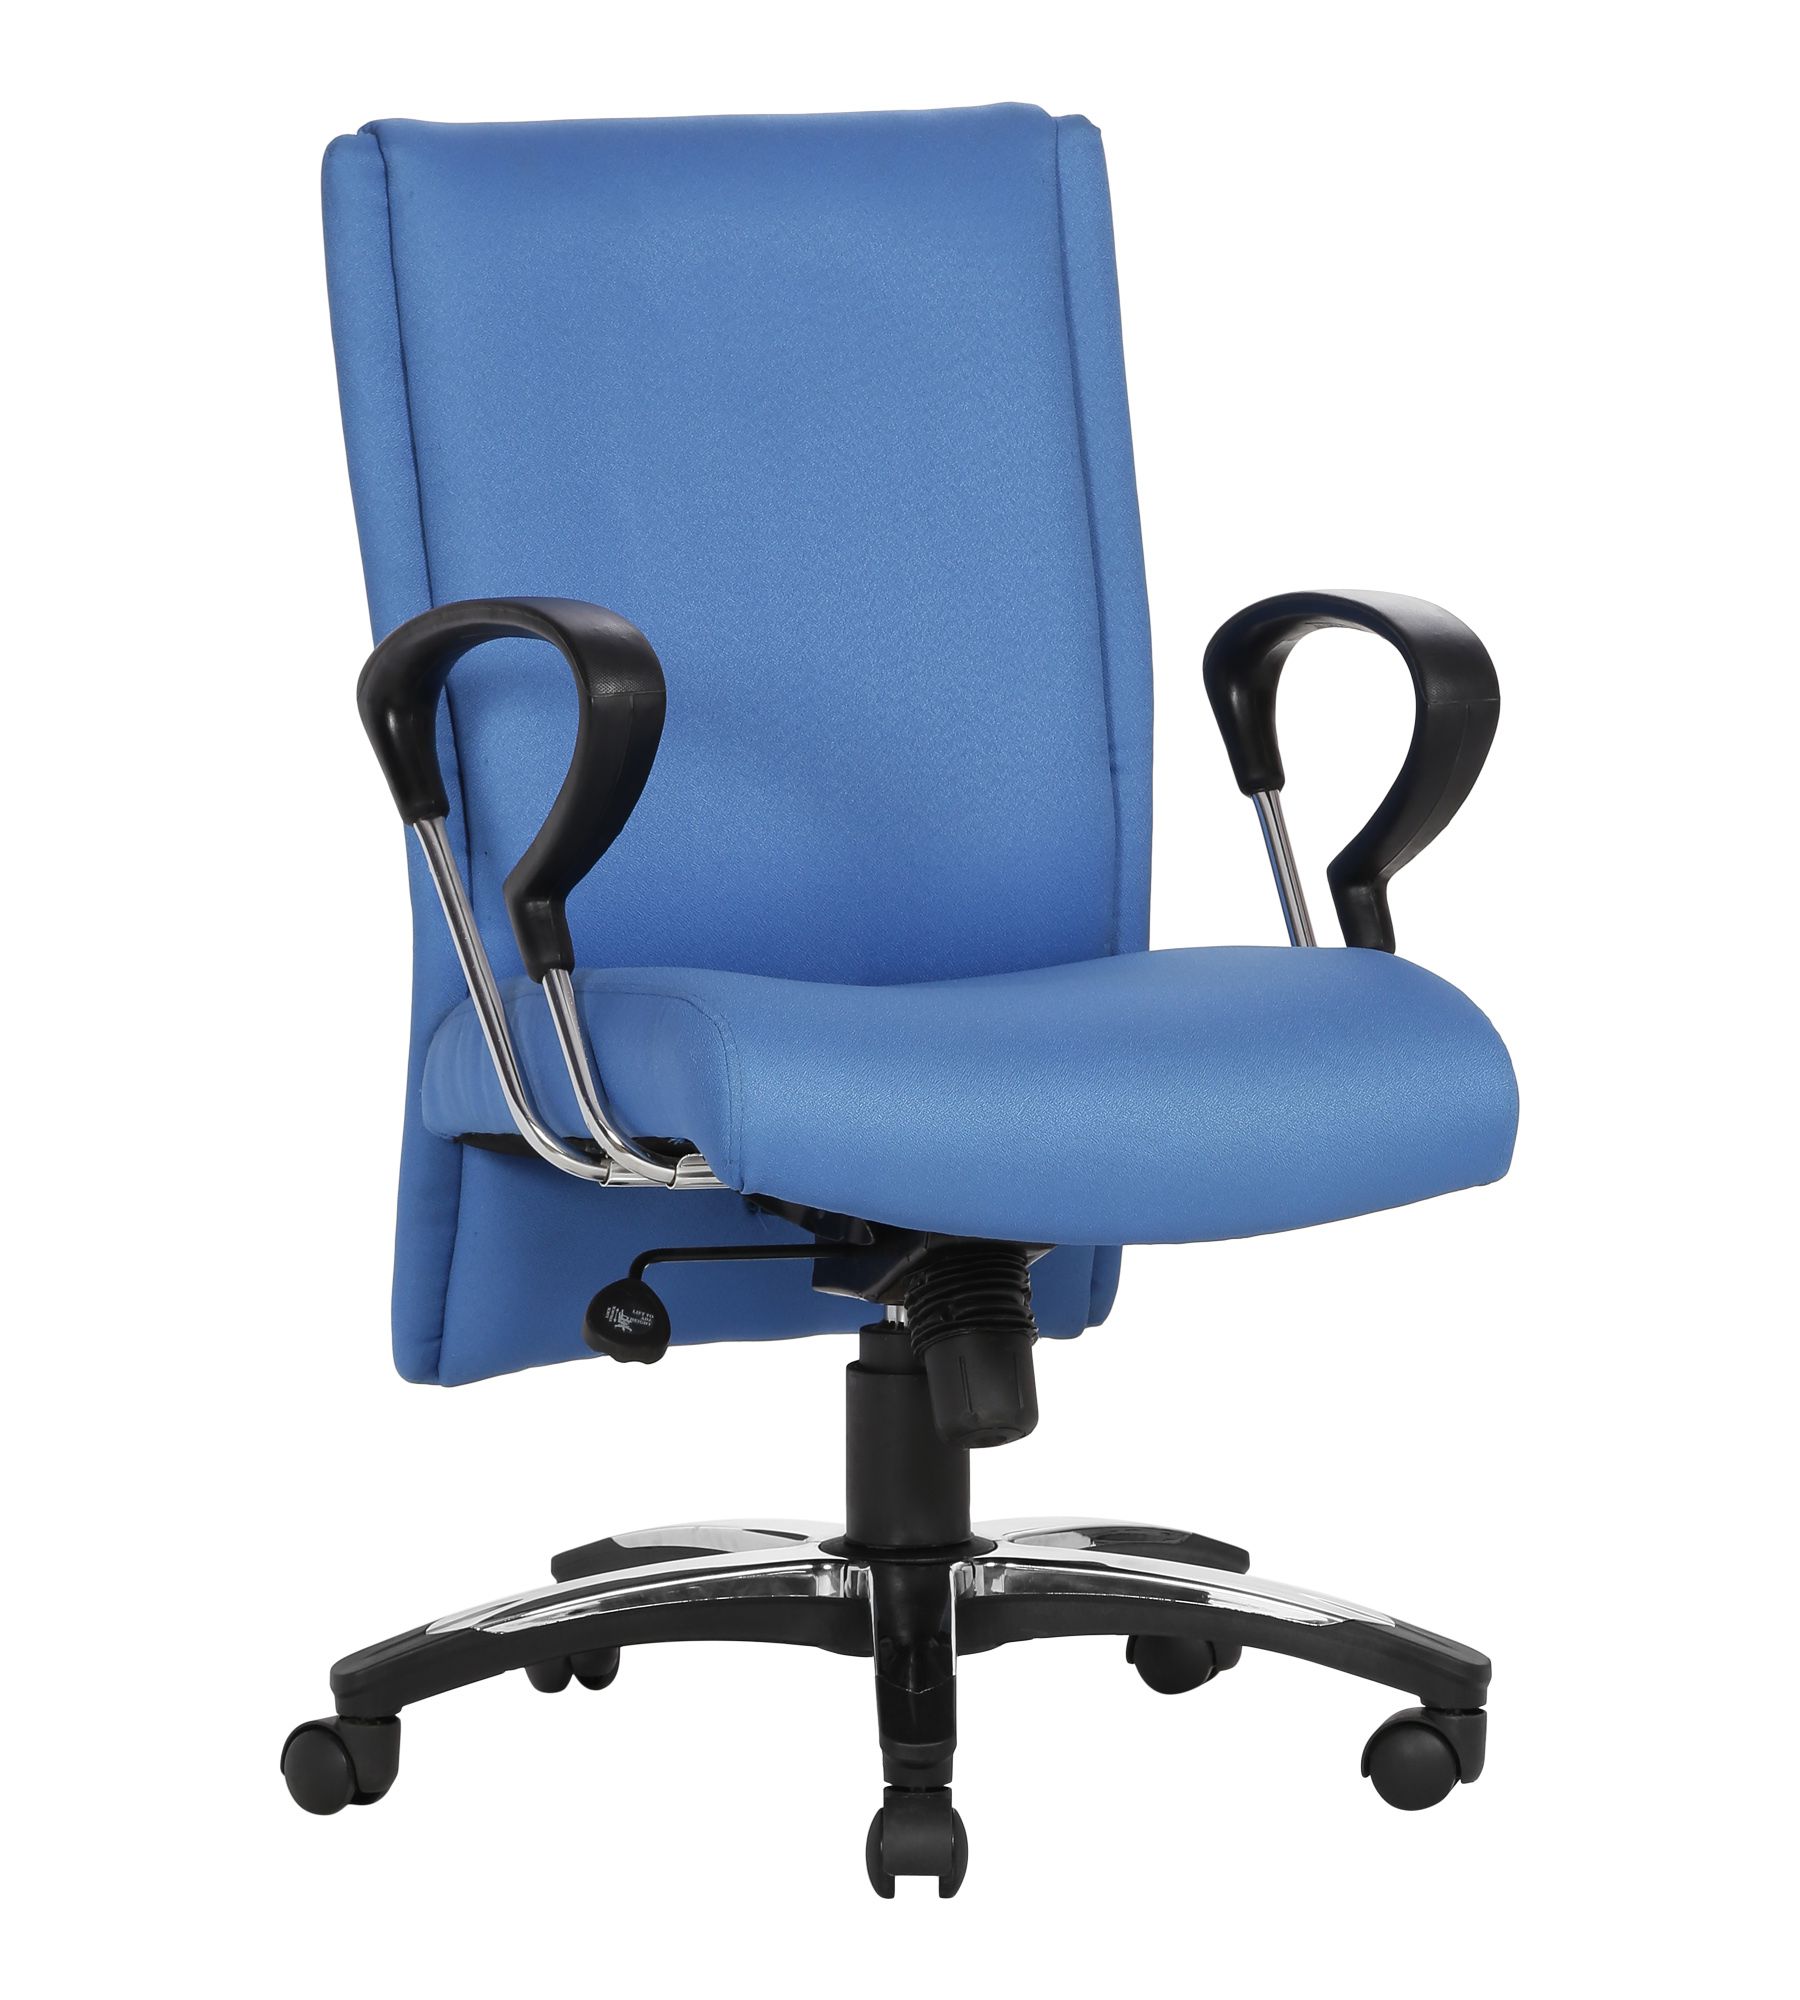 EXECUTIVE OFFICE CHAIR - Buy EXECUTIVE OFFICE CHAIR Online at Best